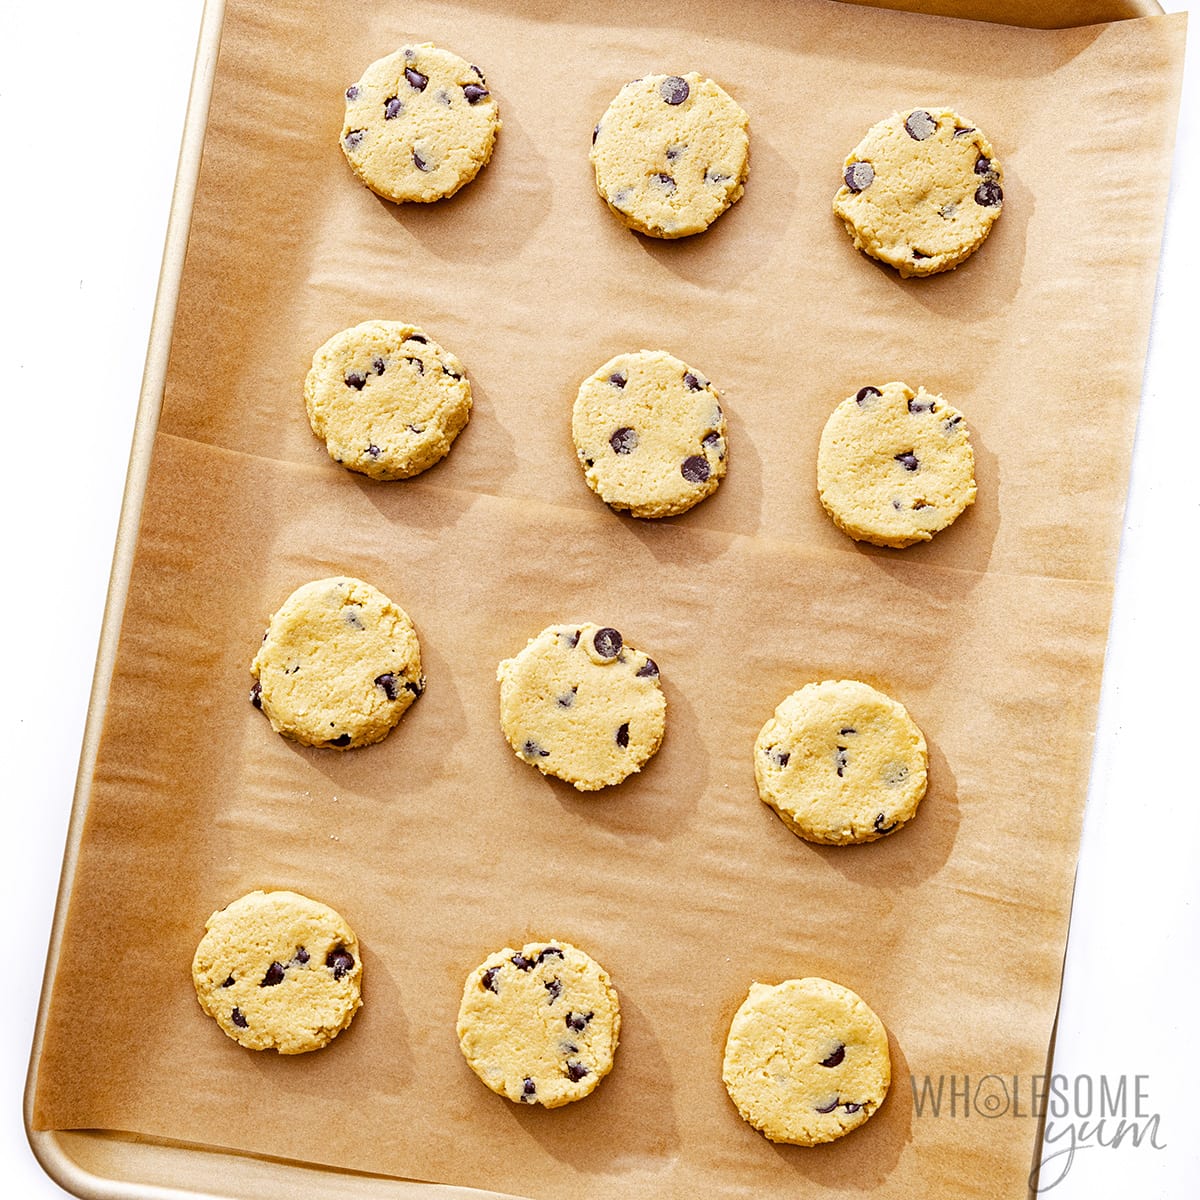 Flattened cookies on a baking sheet before baking.